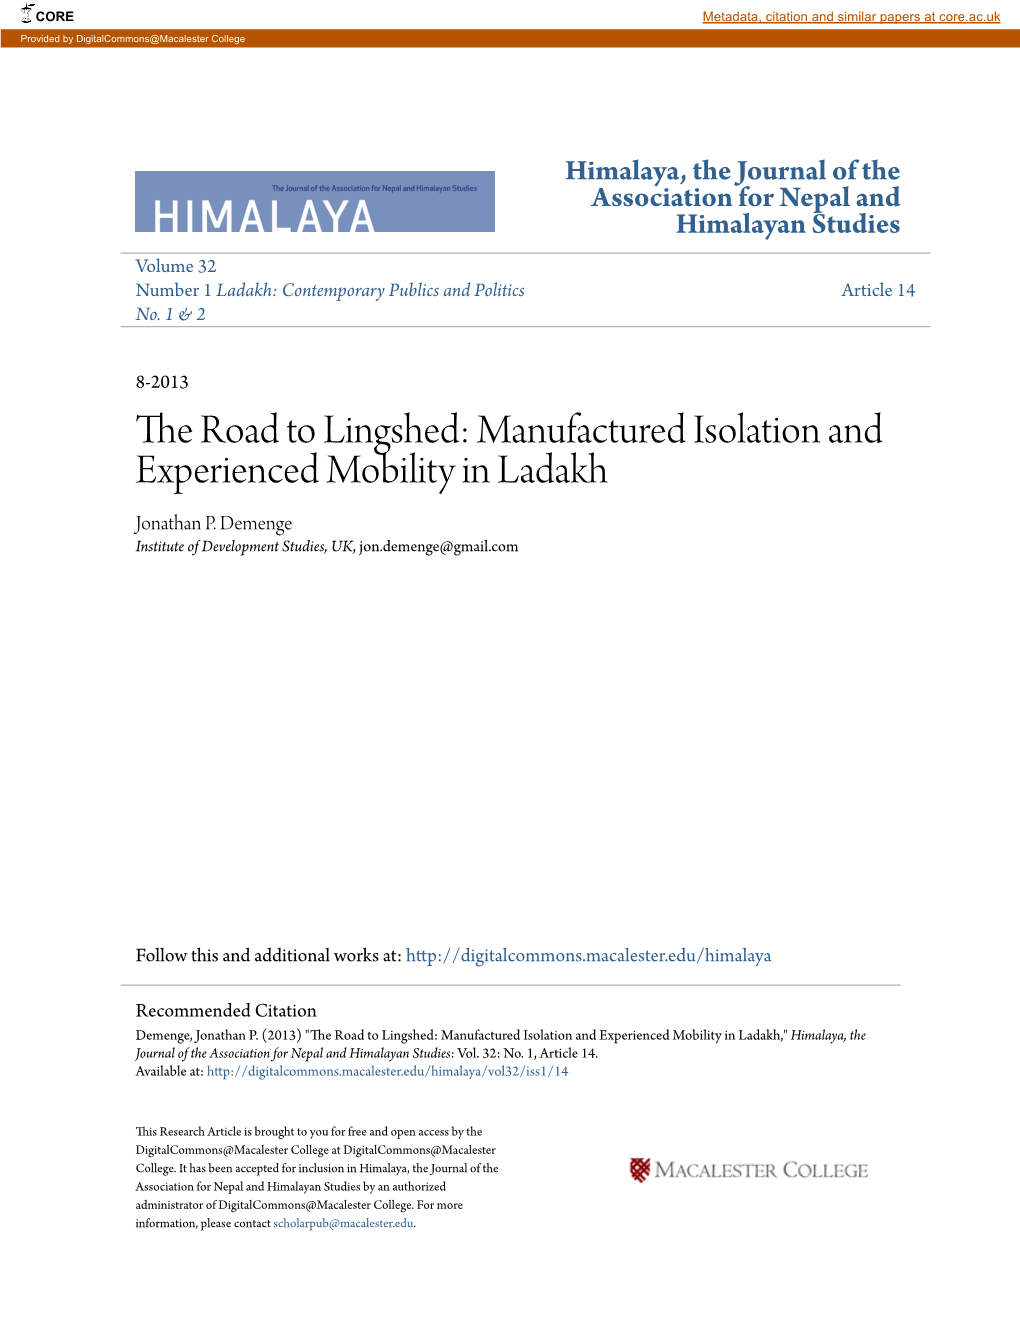 The Road to Lingshed: Manufactured Isolation and Experienced Mobility in Ladakh Jonathan P